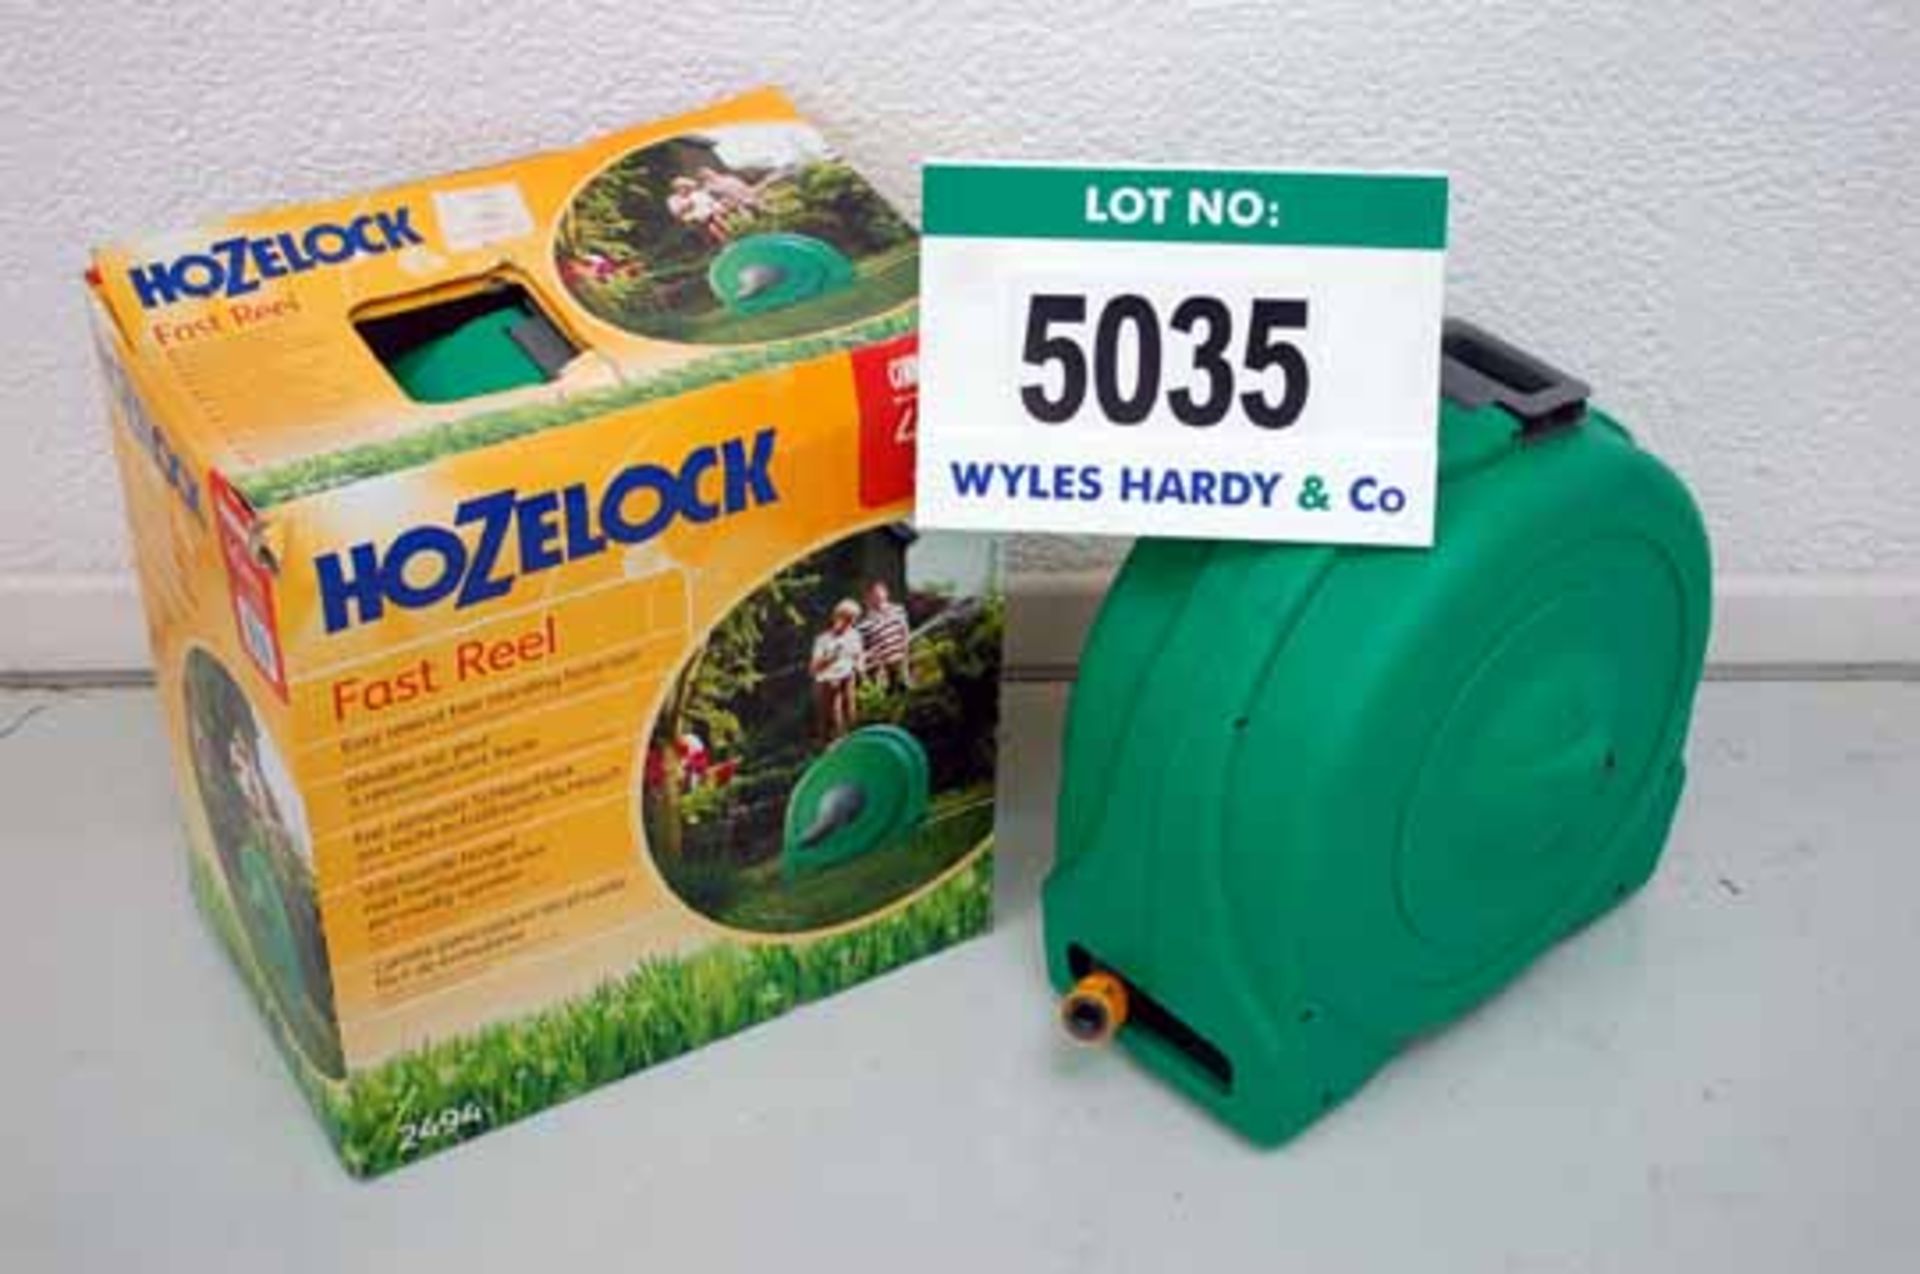 Two HOZELOCK Fast Reel Freestanding Portable Garden Hose Reels each with Approx. 40M Hose (Note